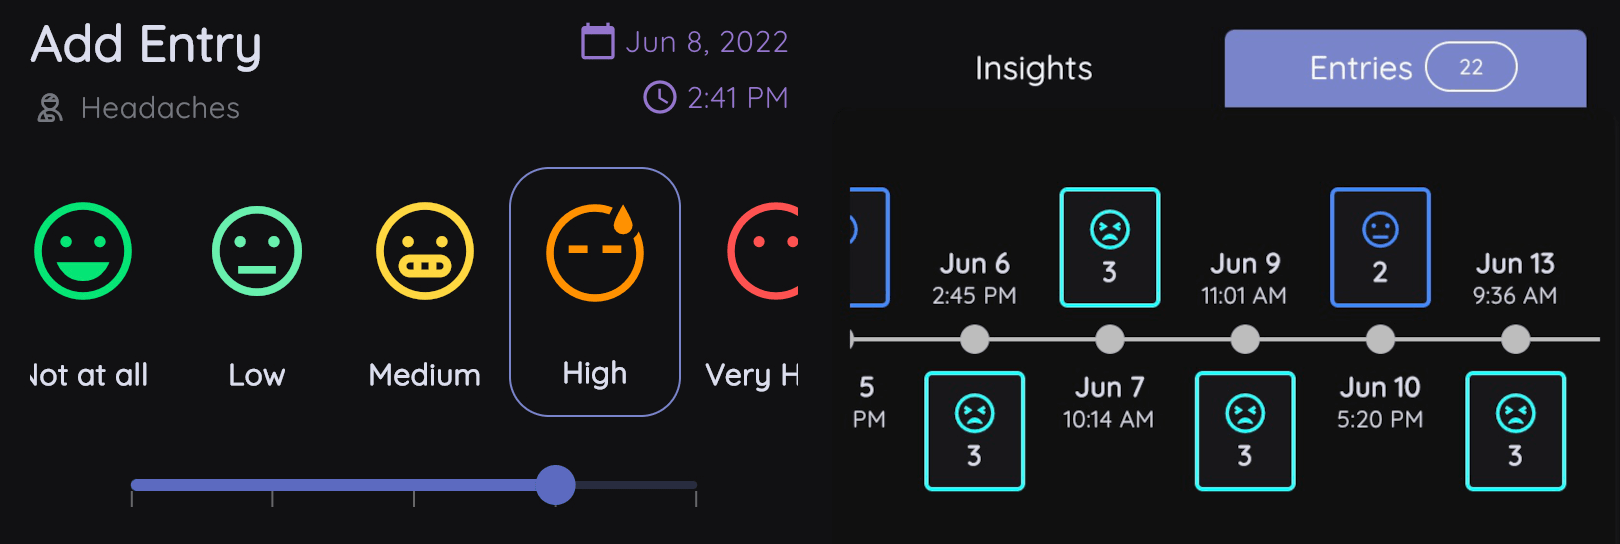 headache tracking app with easy daily entries to log data